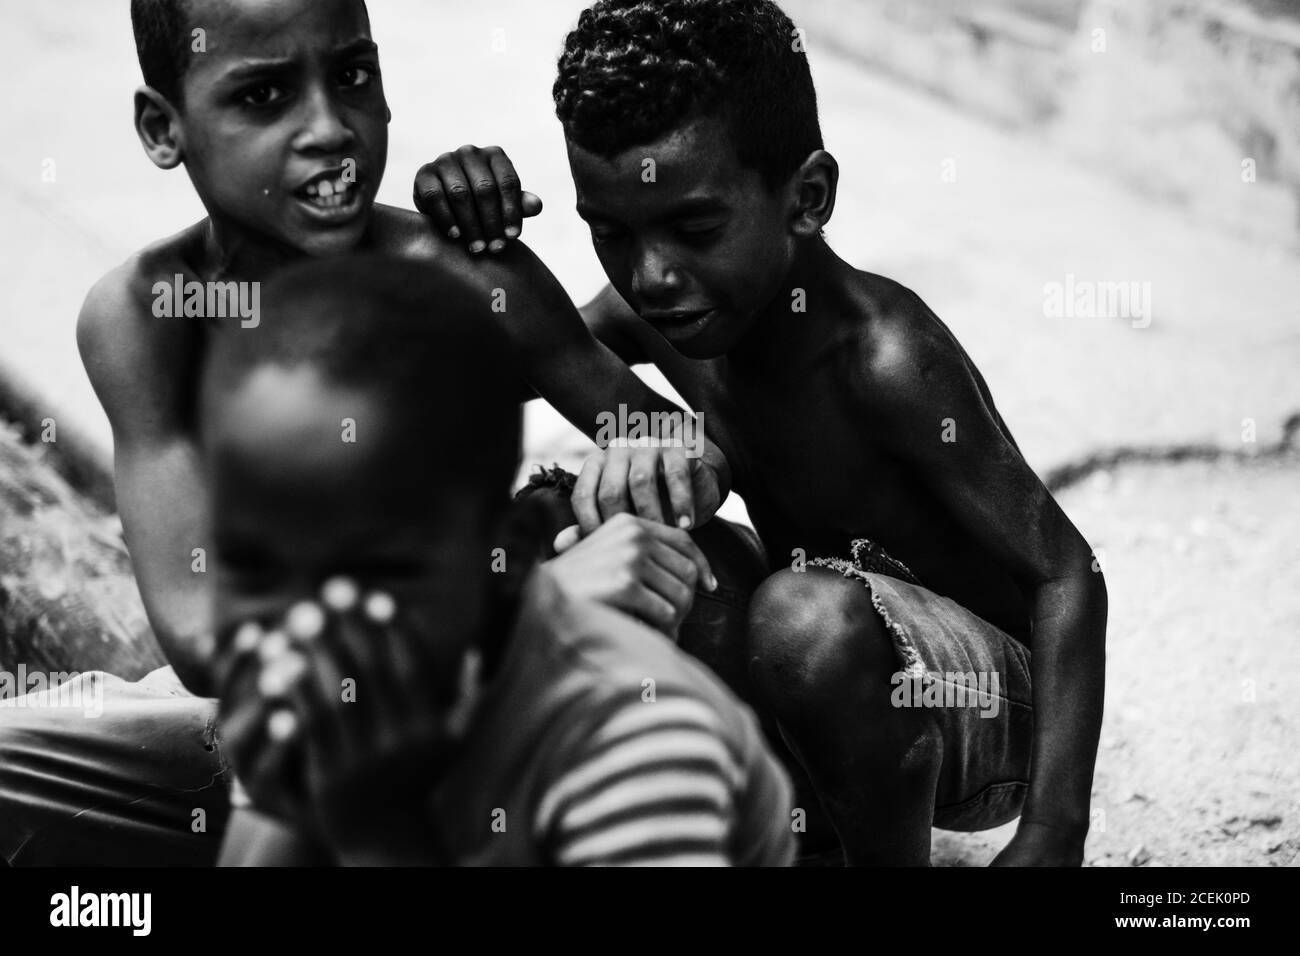 LA HABANA, CUBA - MAY 1, 2018: Black and white shot of ethnic children spending time on street of Cuba city in sunlight. Stock Photo